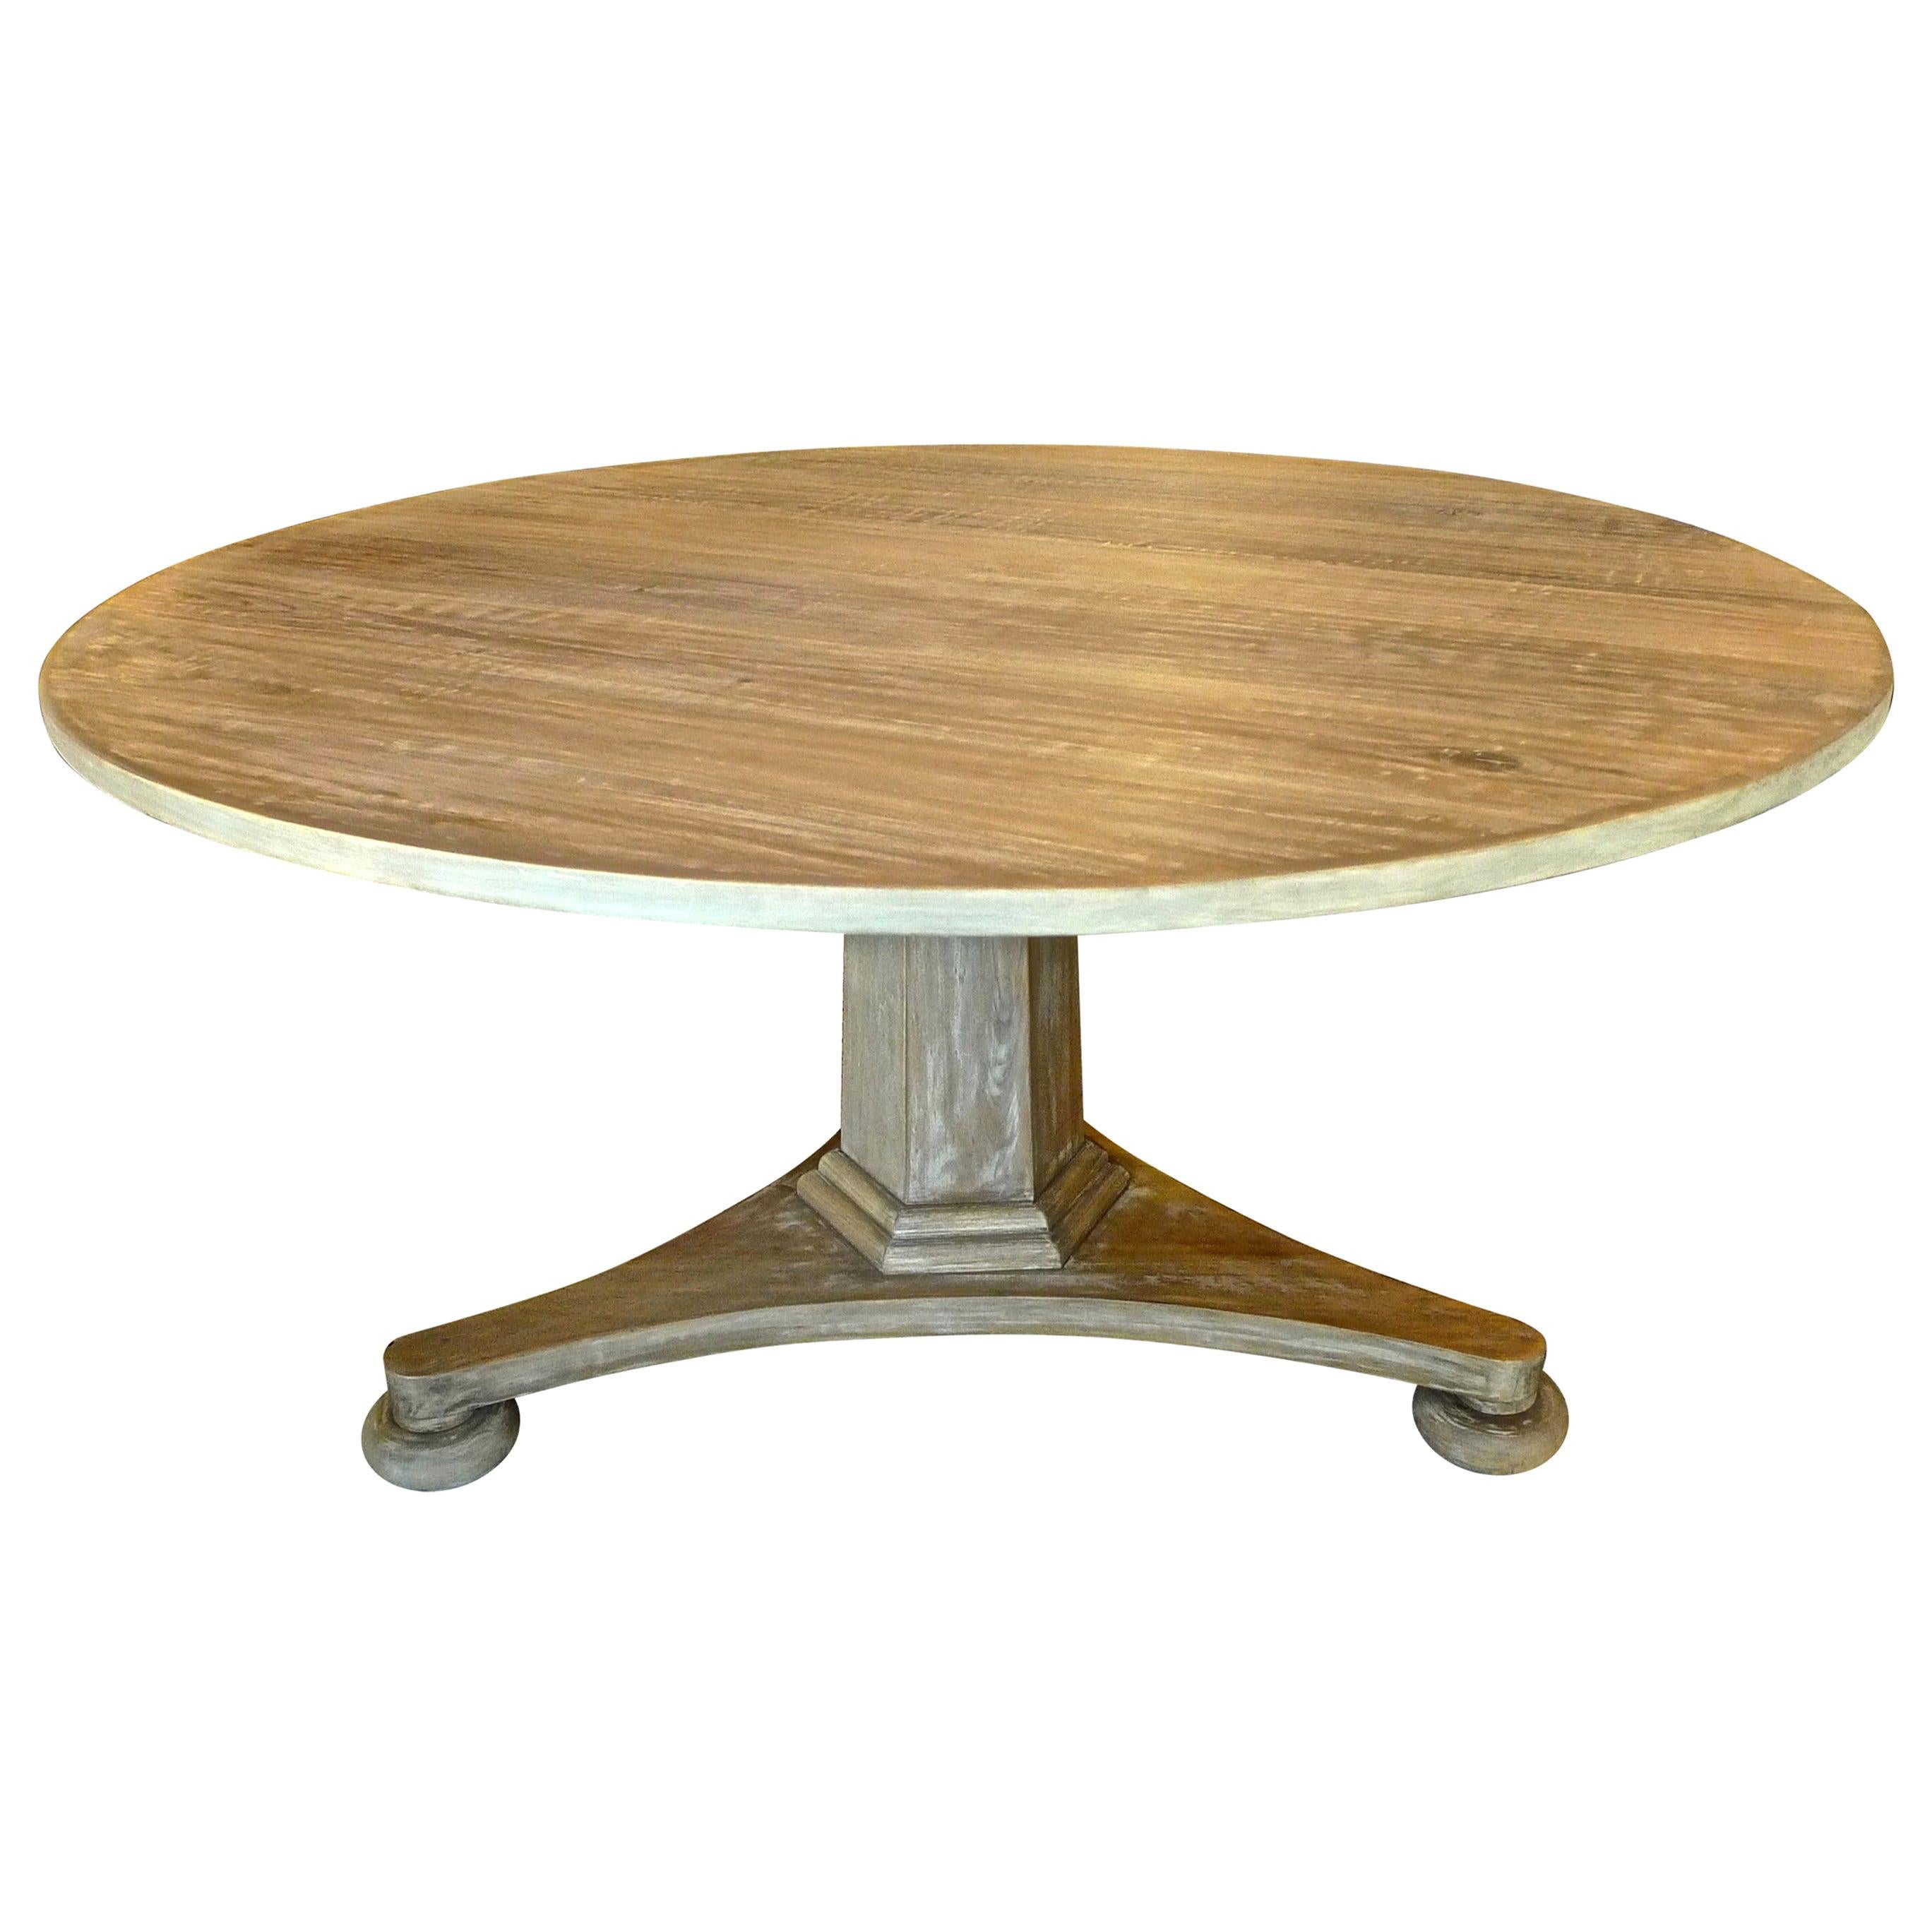 Swedish Style Contemporary Alder-Wood Round Pedestal Table For Sale